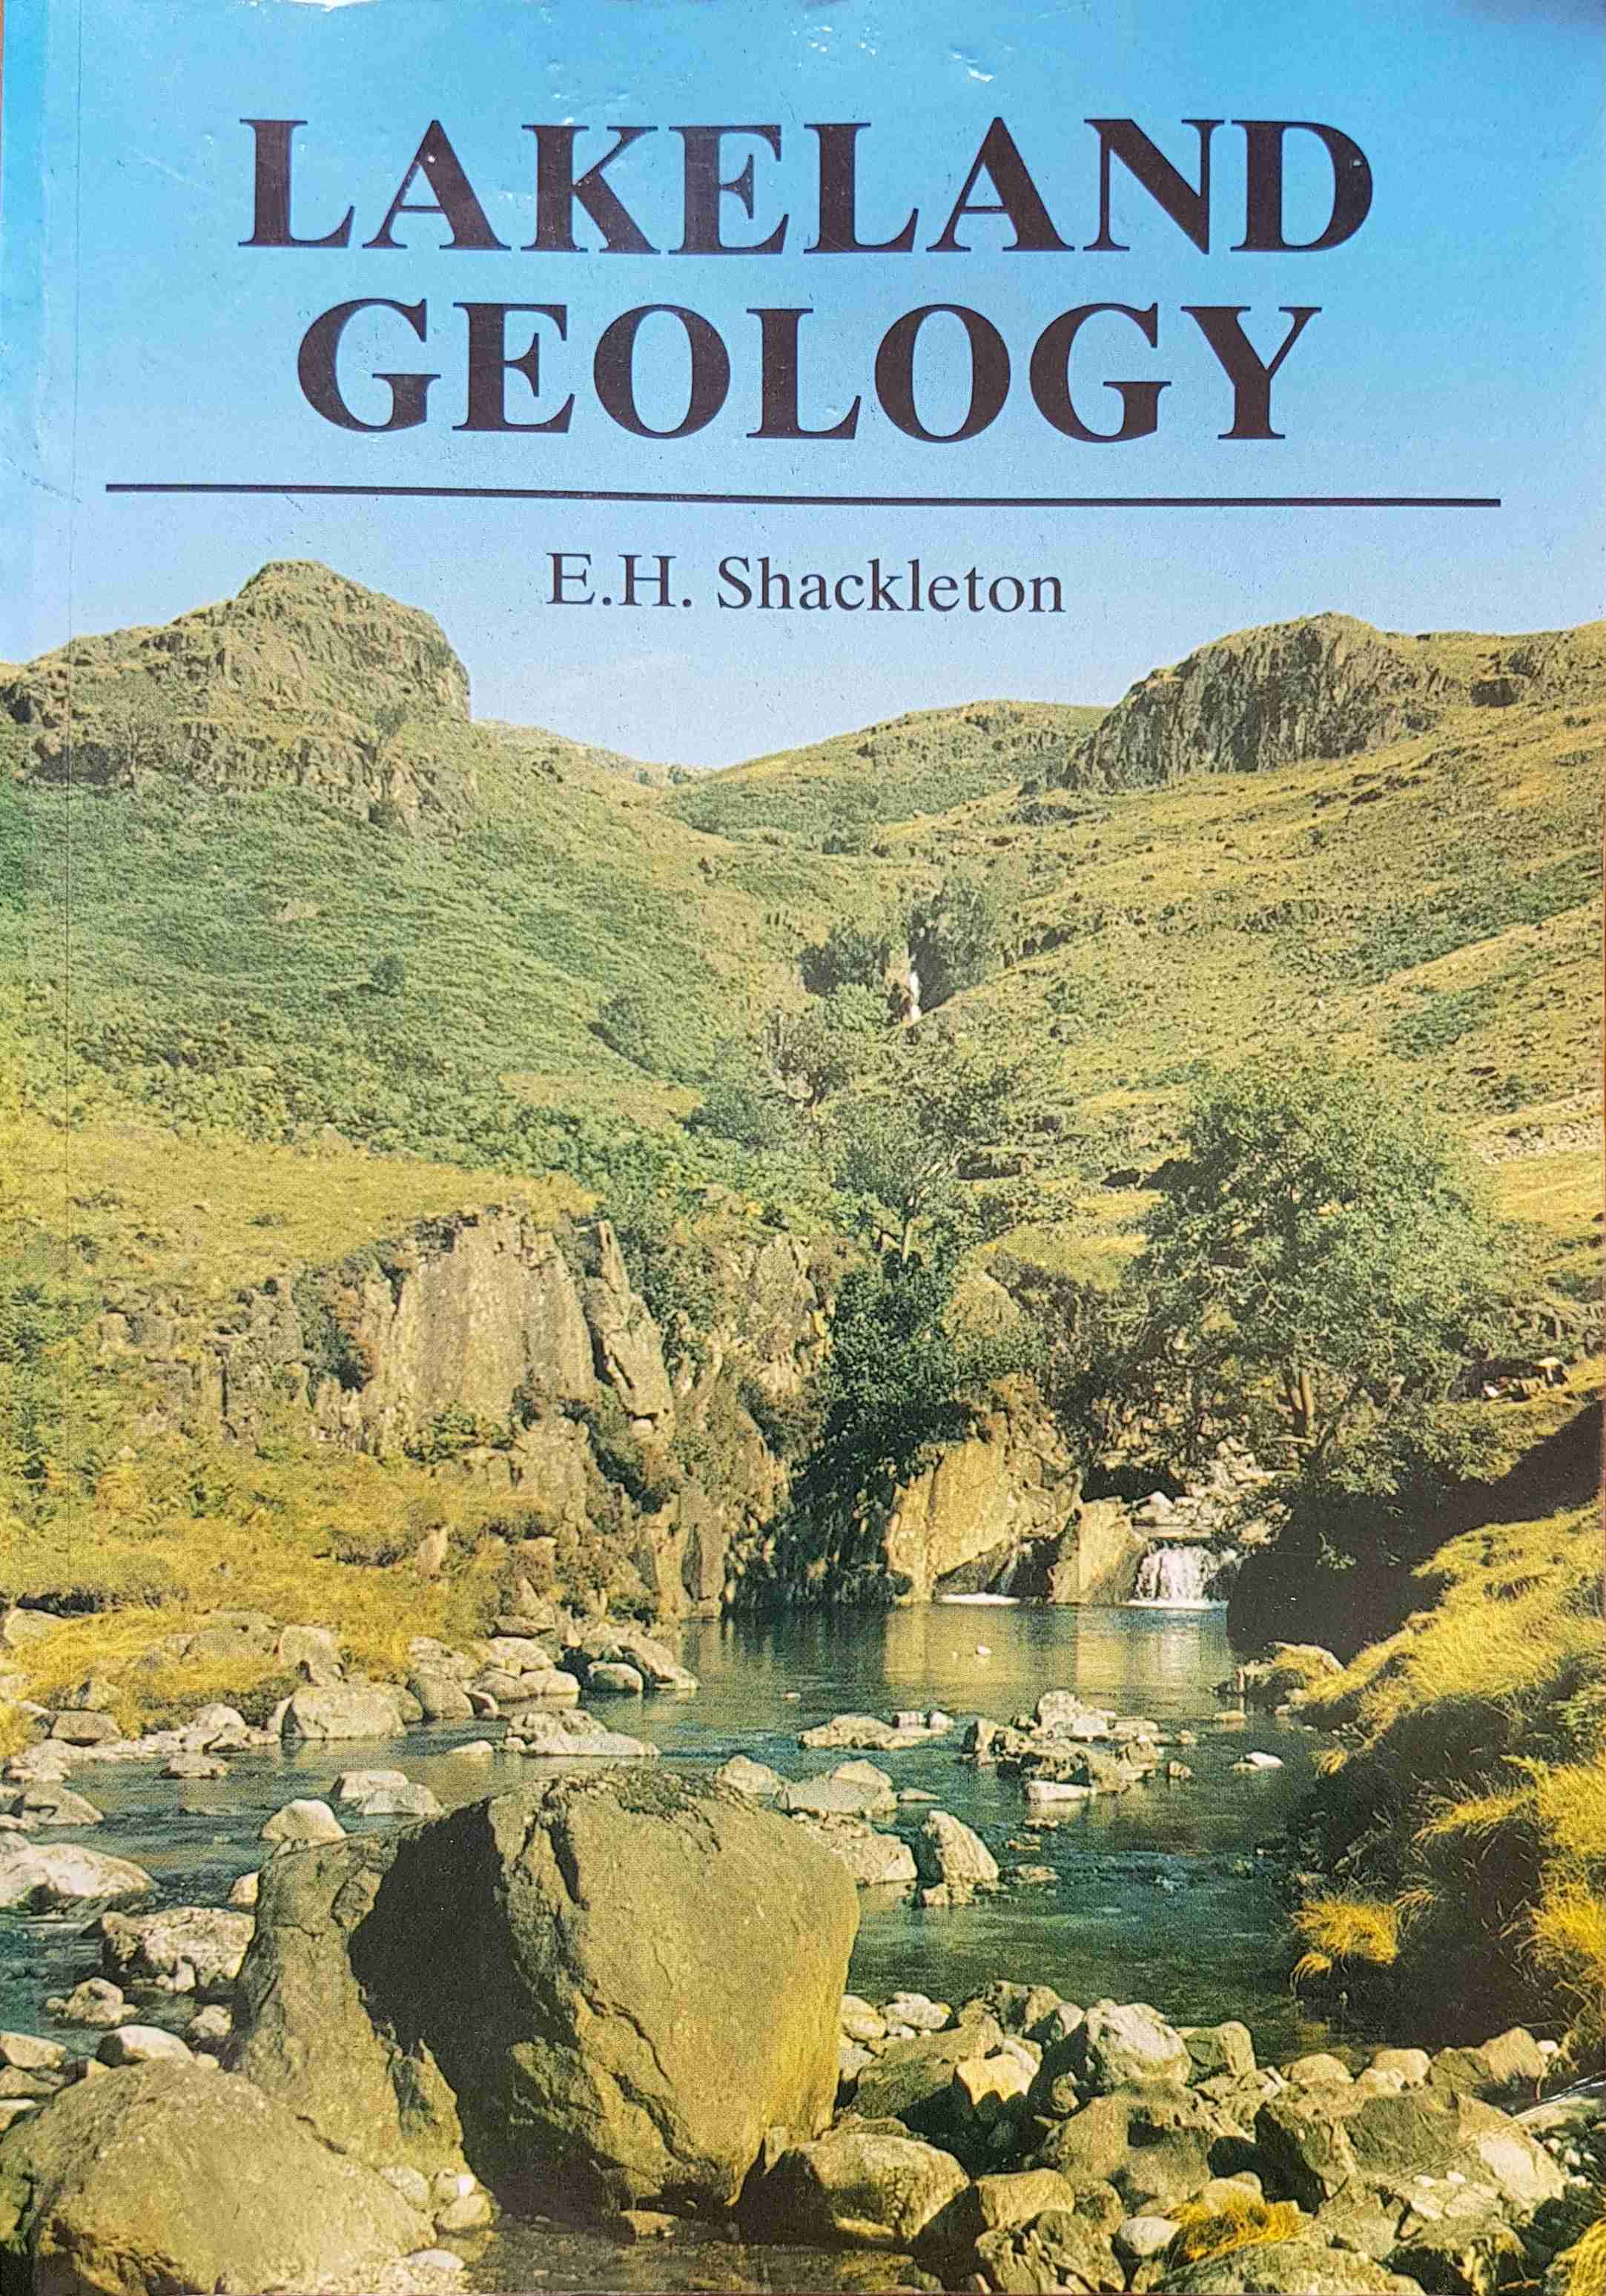 Picture of 1-85568-022-X Lakeland geology by artist E. H. Shackleton 